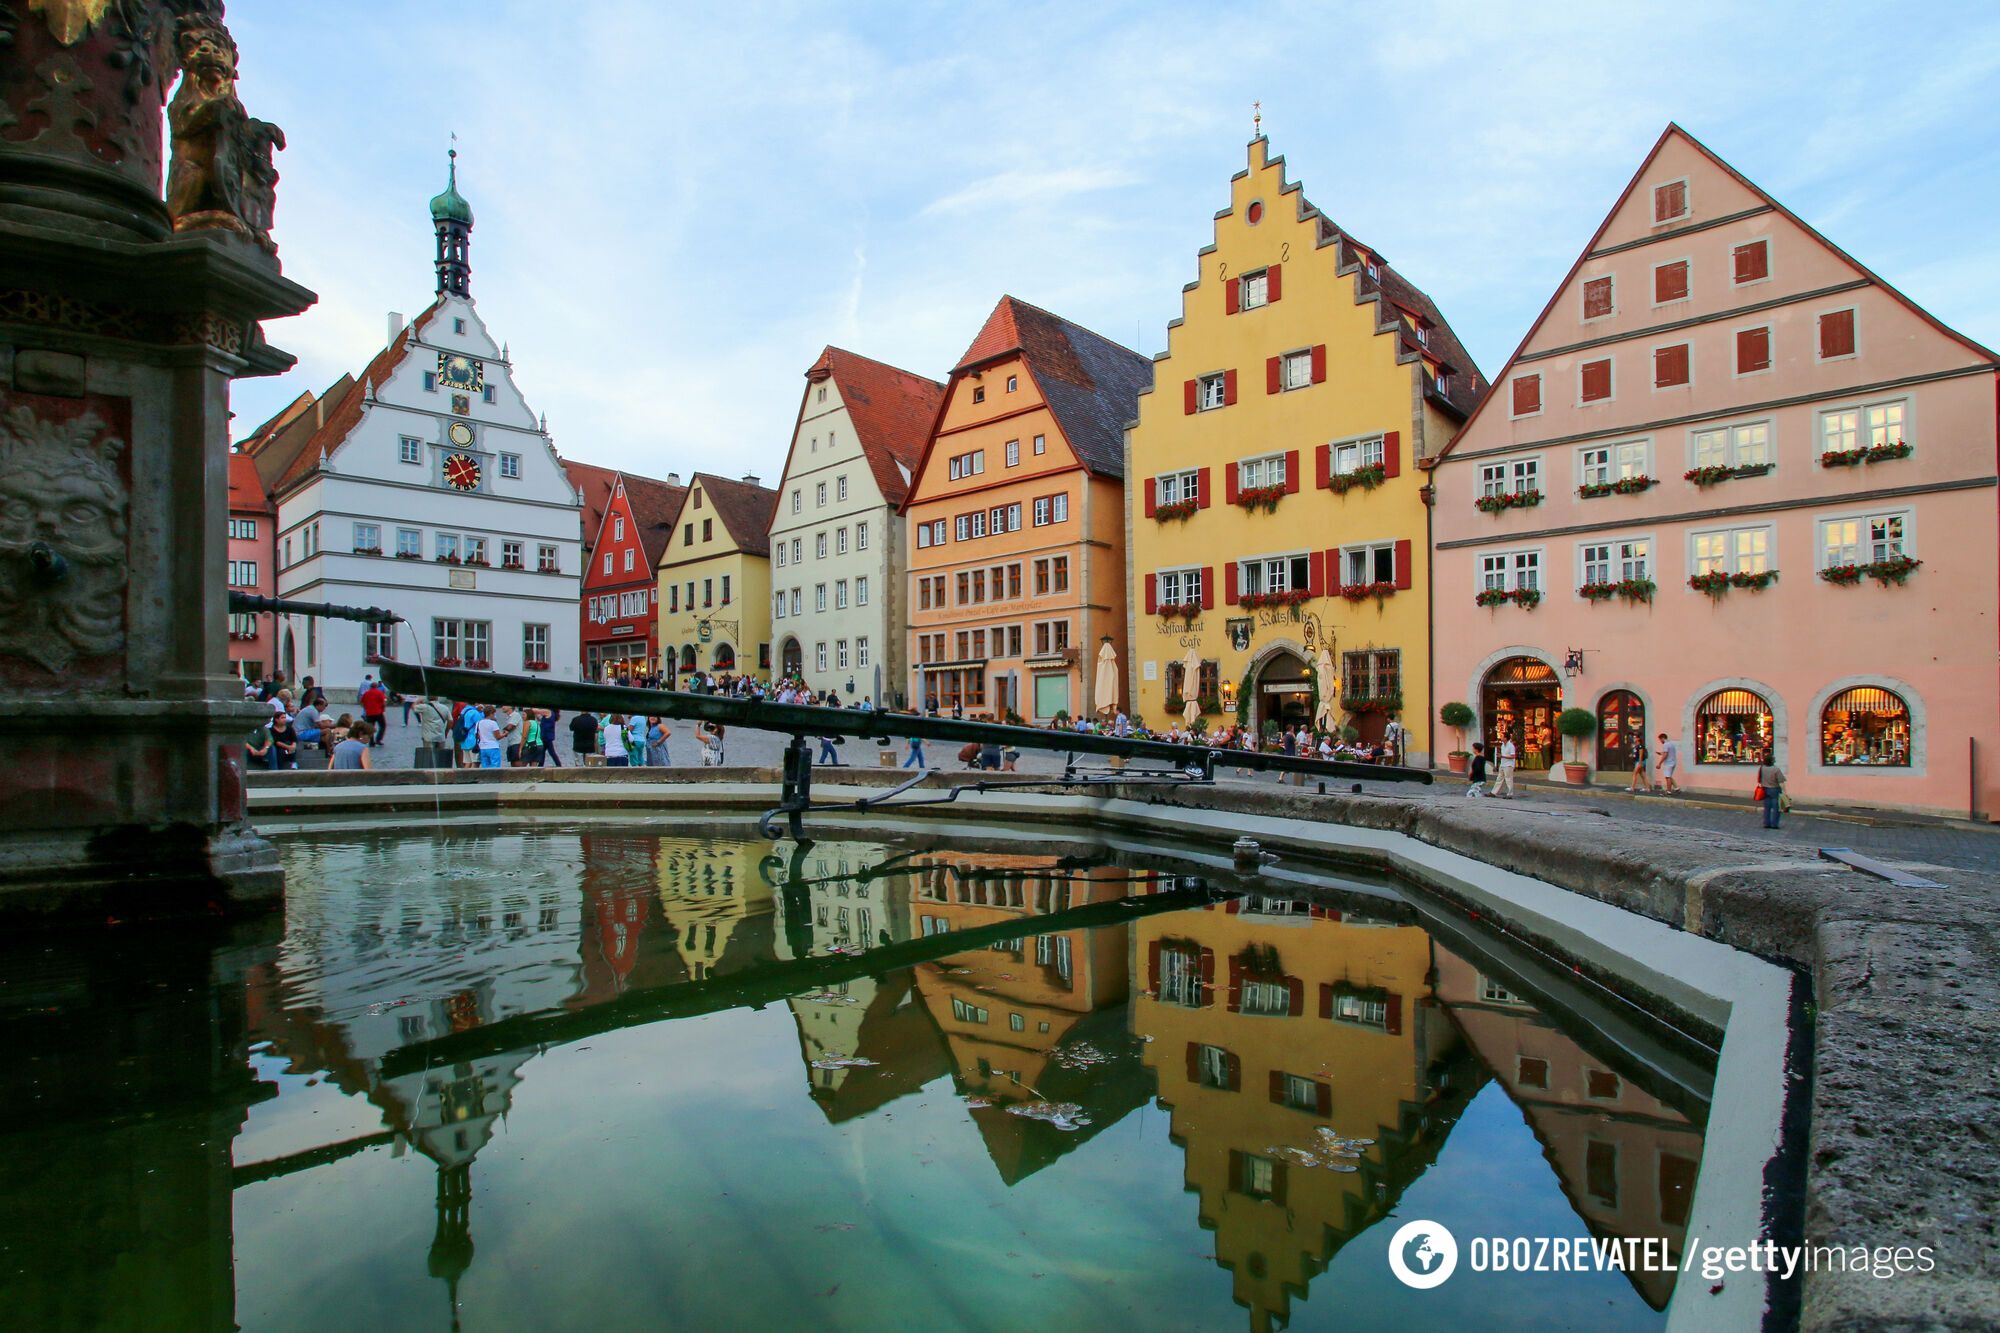 ''Living fairy tale'': what a tiny town in Europe looks like that inspired Disney classics. Photo